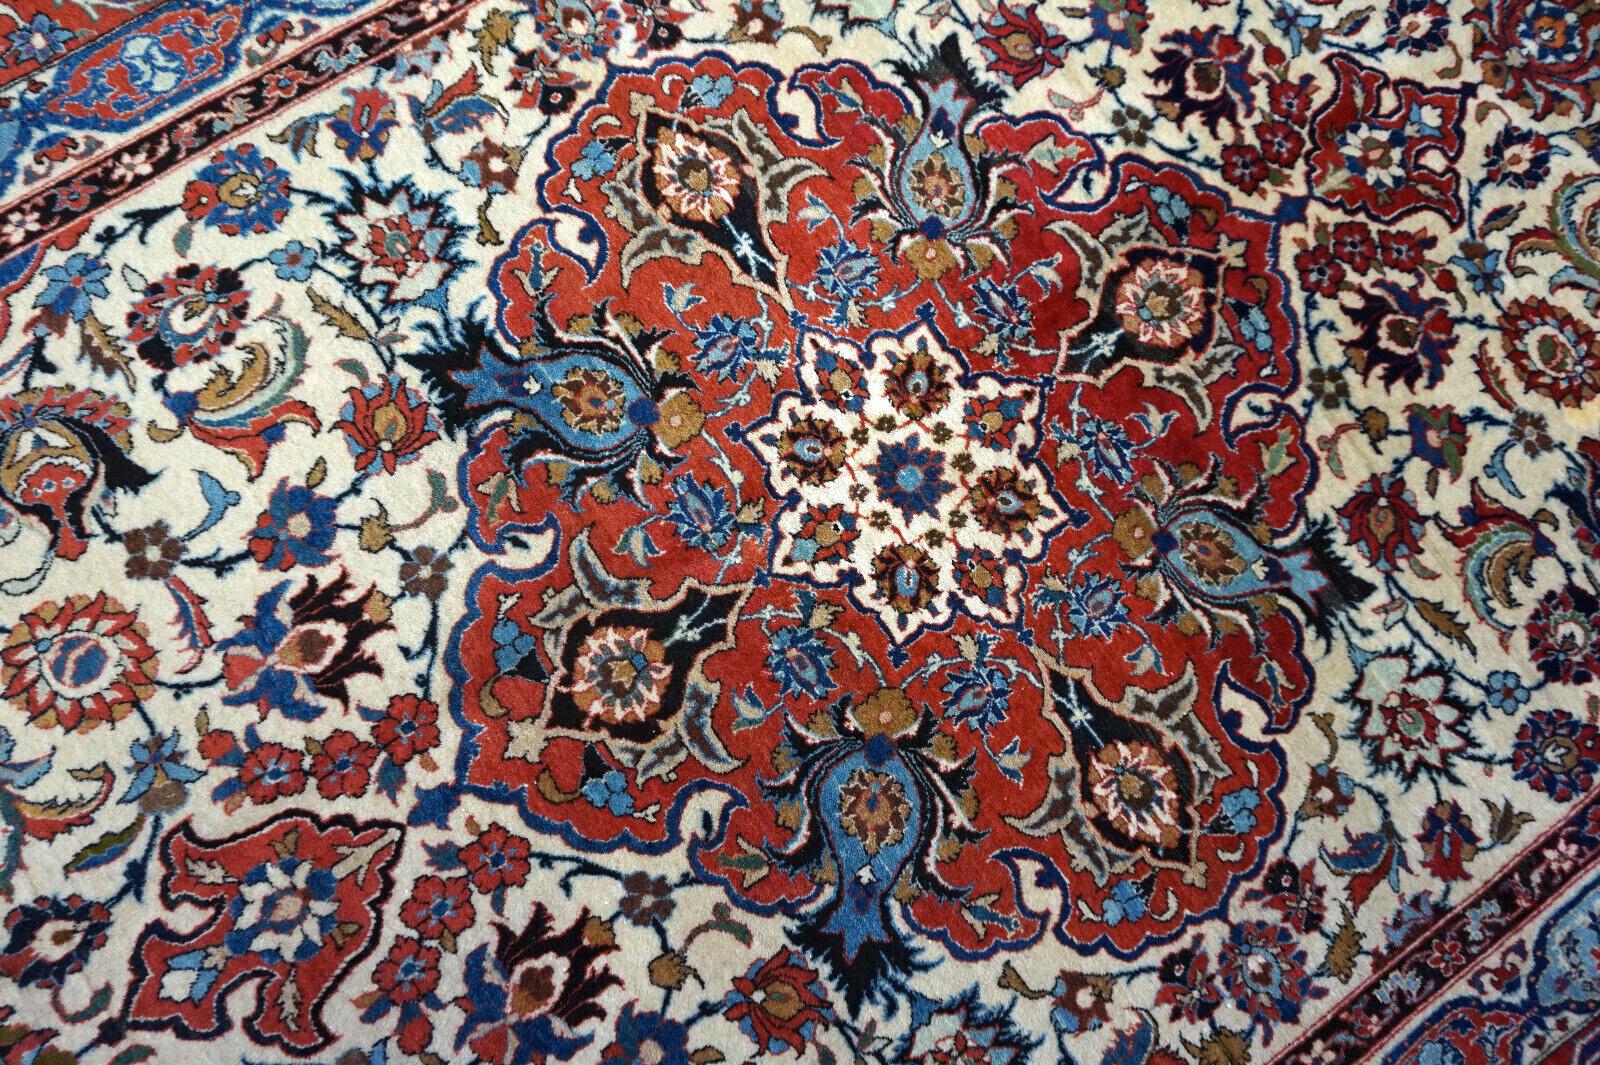 Handmade Antique Persian Style Isfahan Rug 4.5' x 7.7', 1920s - 1D53 For Sale 4